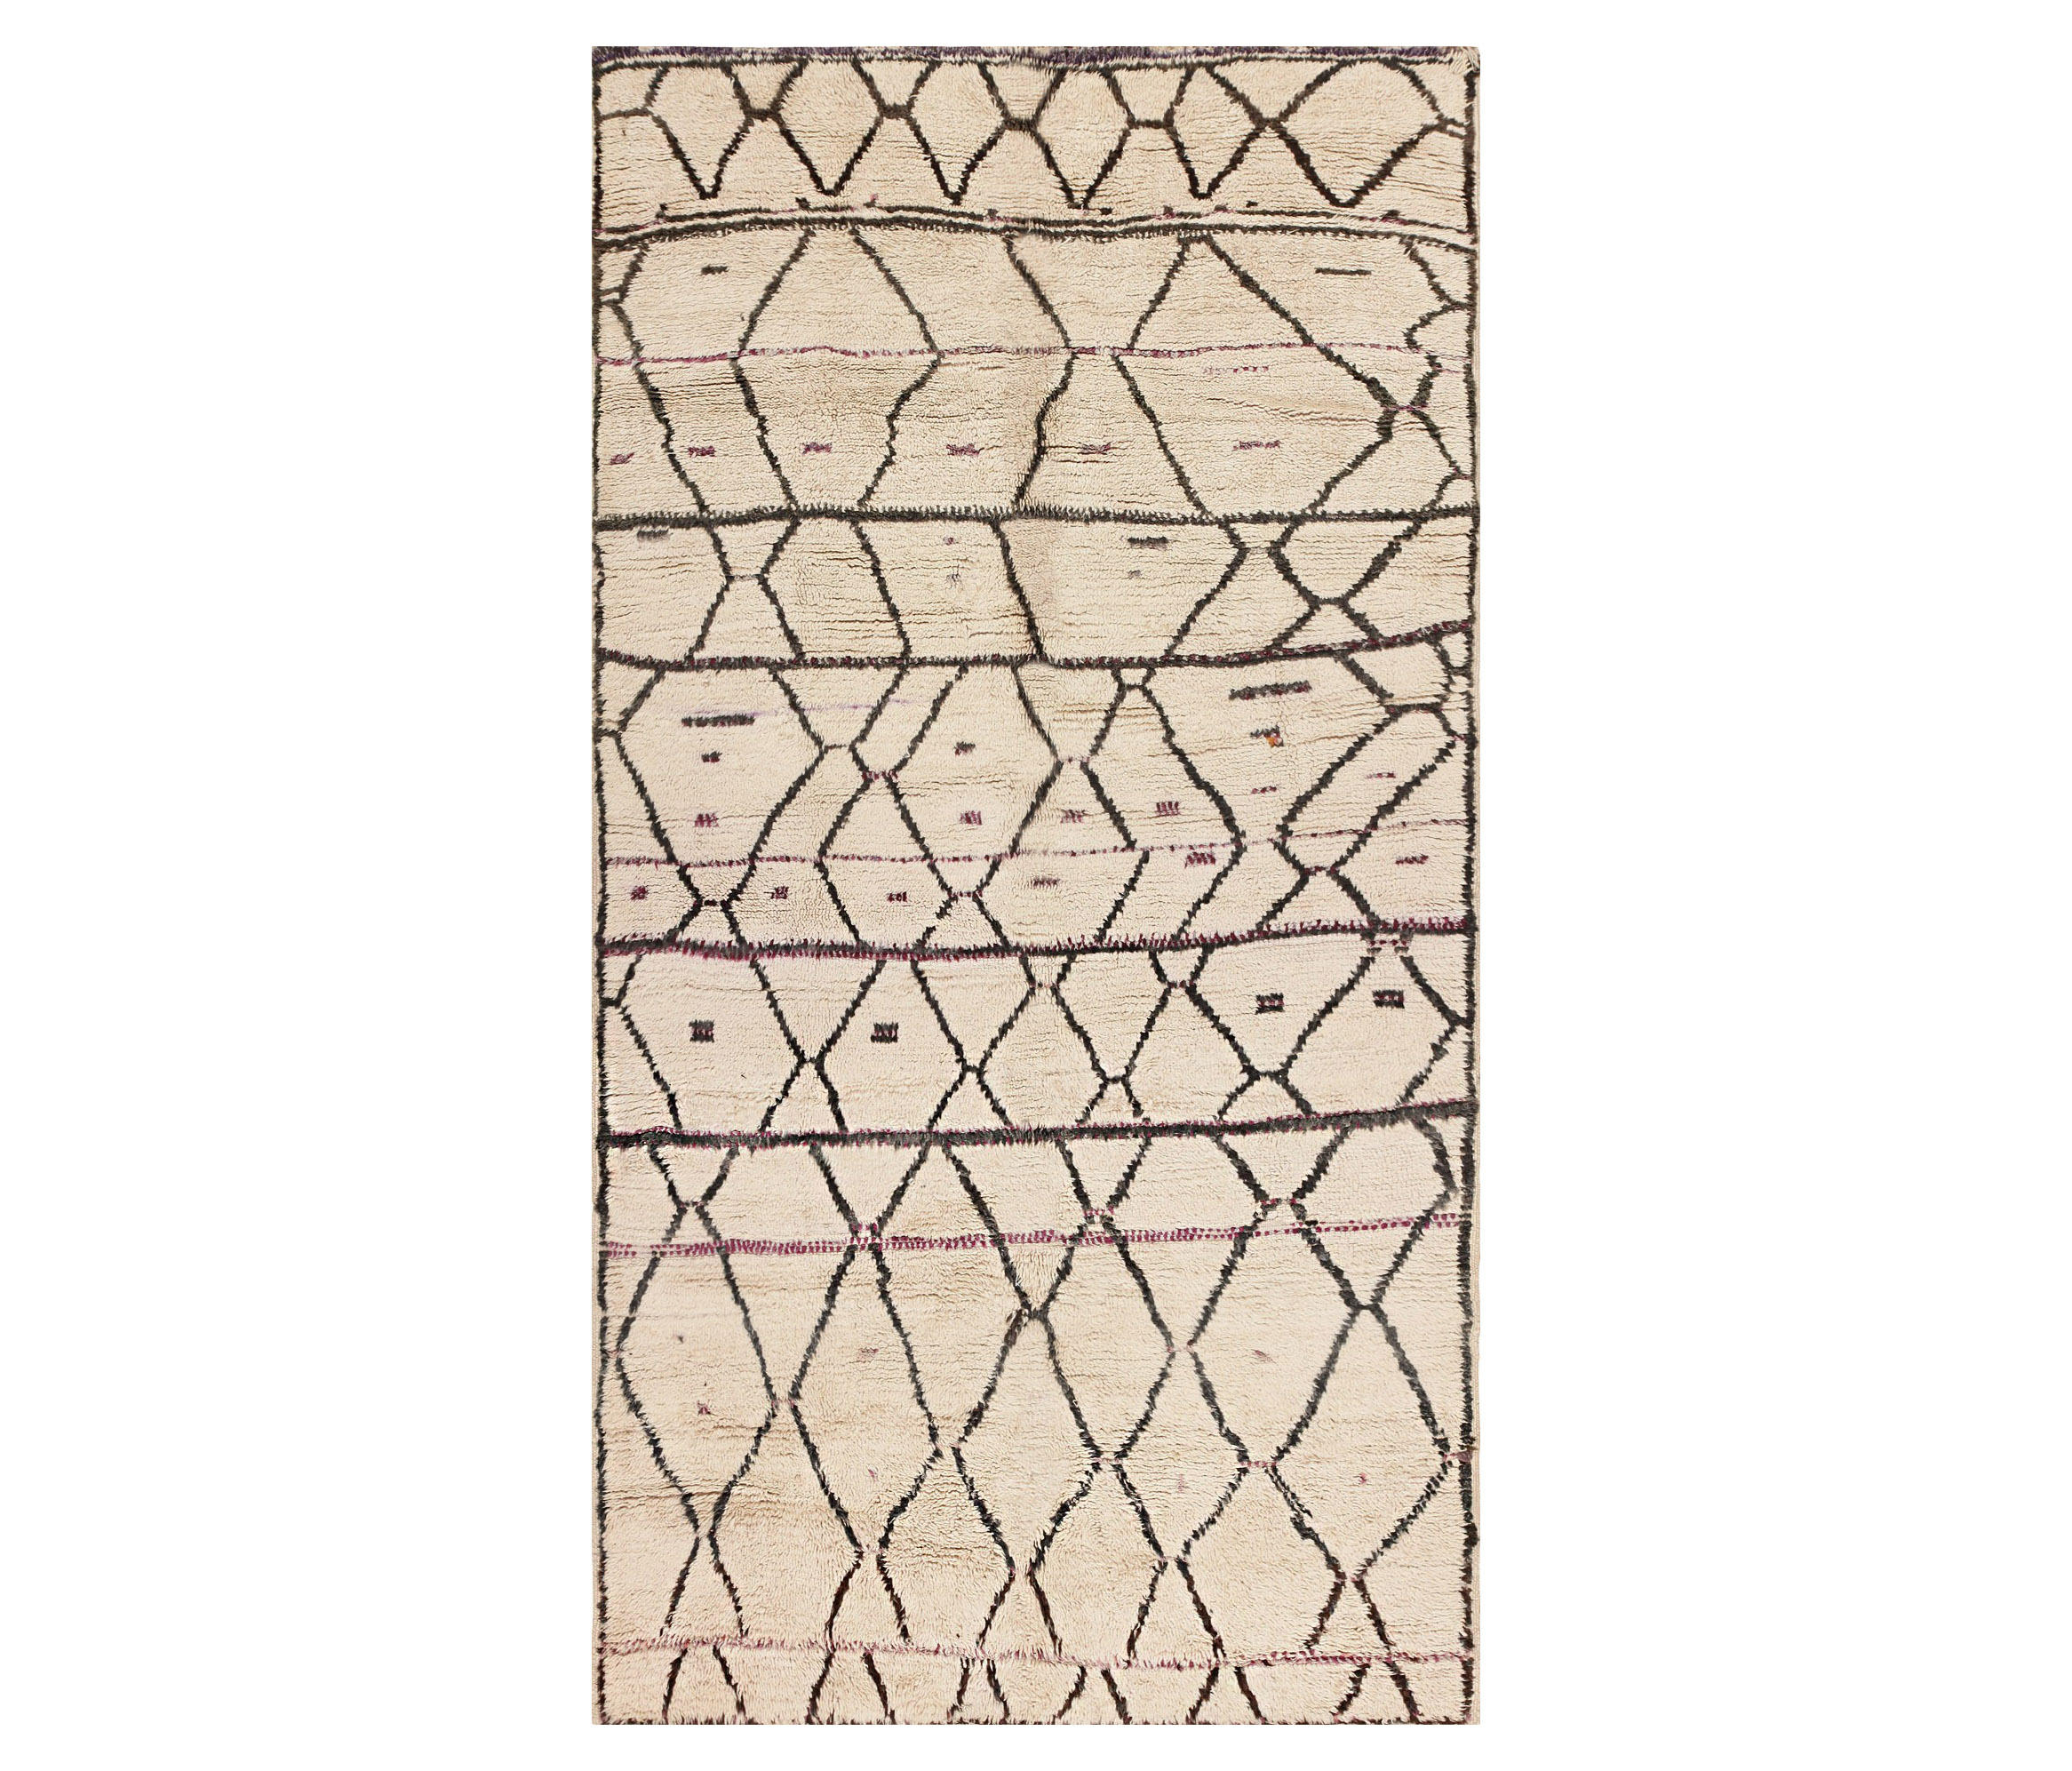 Vintage Beni Ourain Rug From Morocco, Vintage Beni Ourain Rug